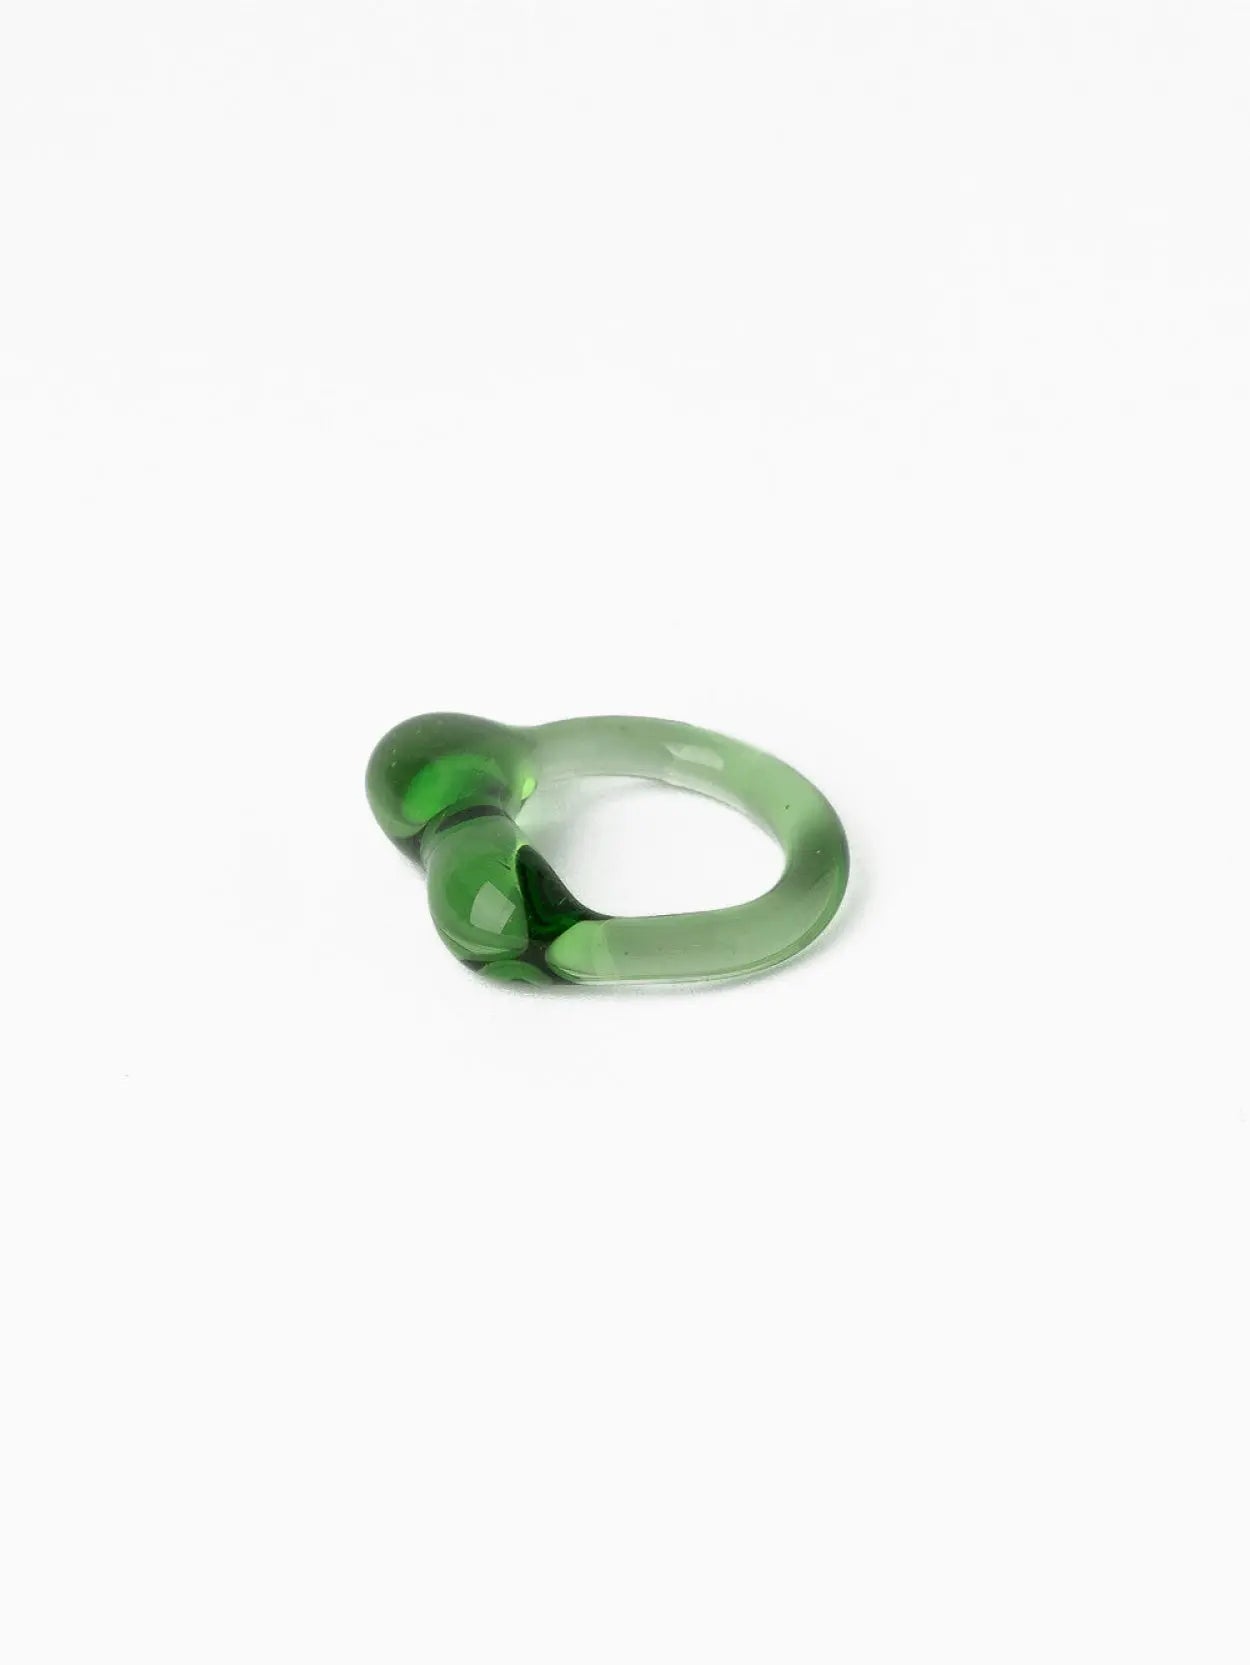 A translucent green ring with organic, bulbous shapes is placed on a plain white background. The design features a smooth finish with a glossy surface, creating a unique and artistic appearance, reminiscent of the avant-garde styles often found in Barcelona's boutique stores. The product is the Caju Ring Green by Nathalie Schreckenberg.